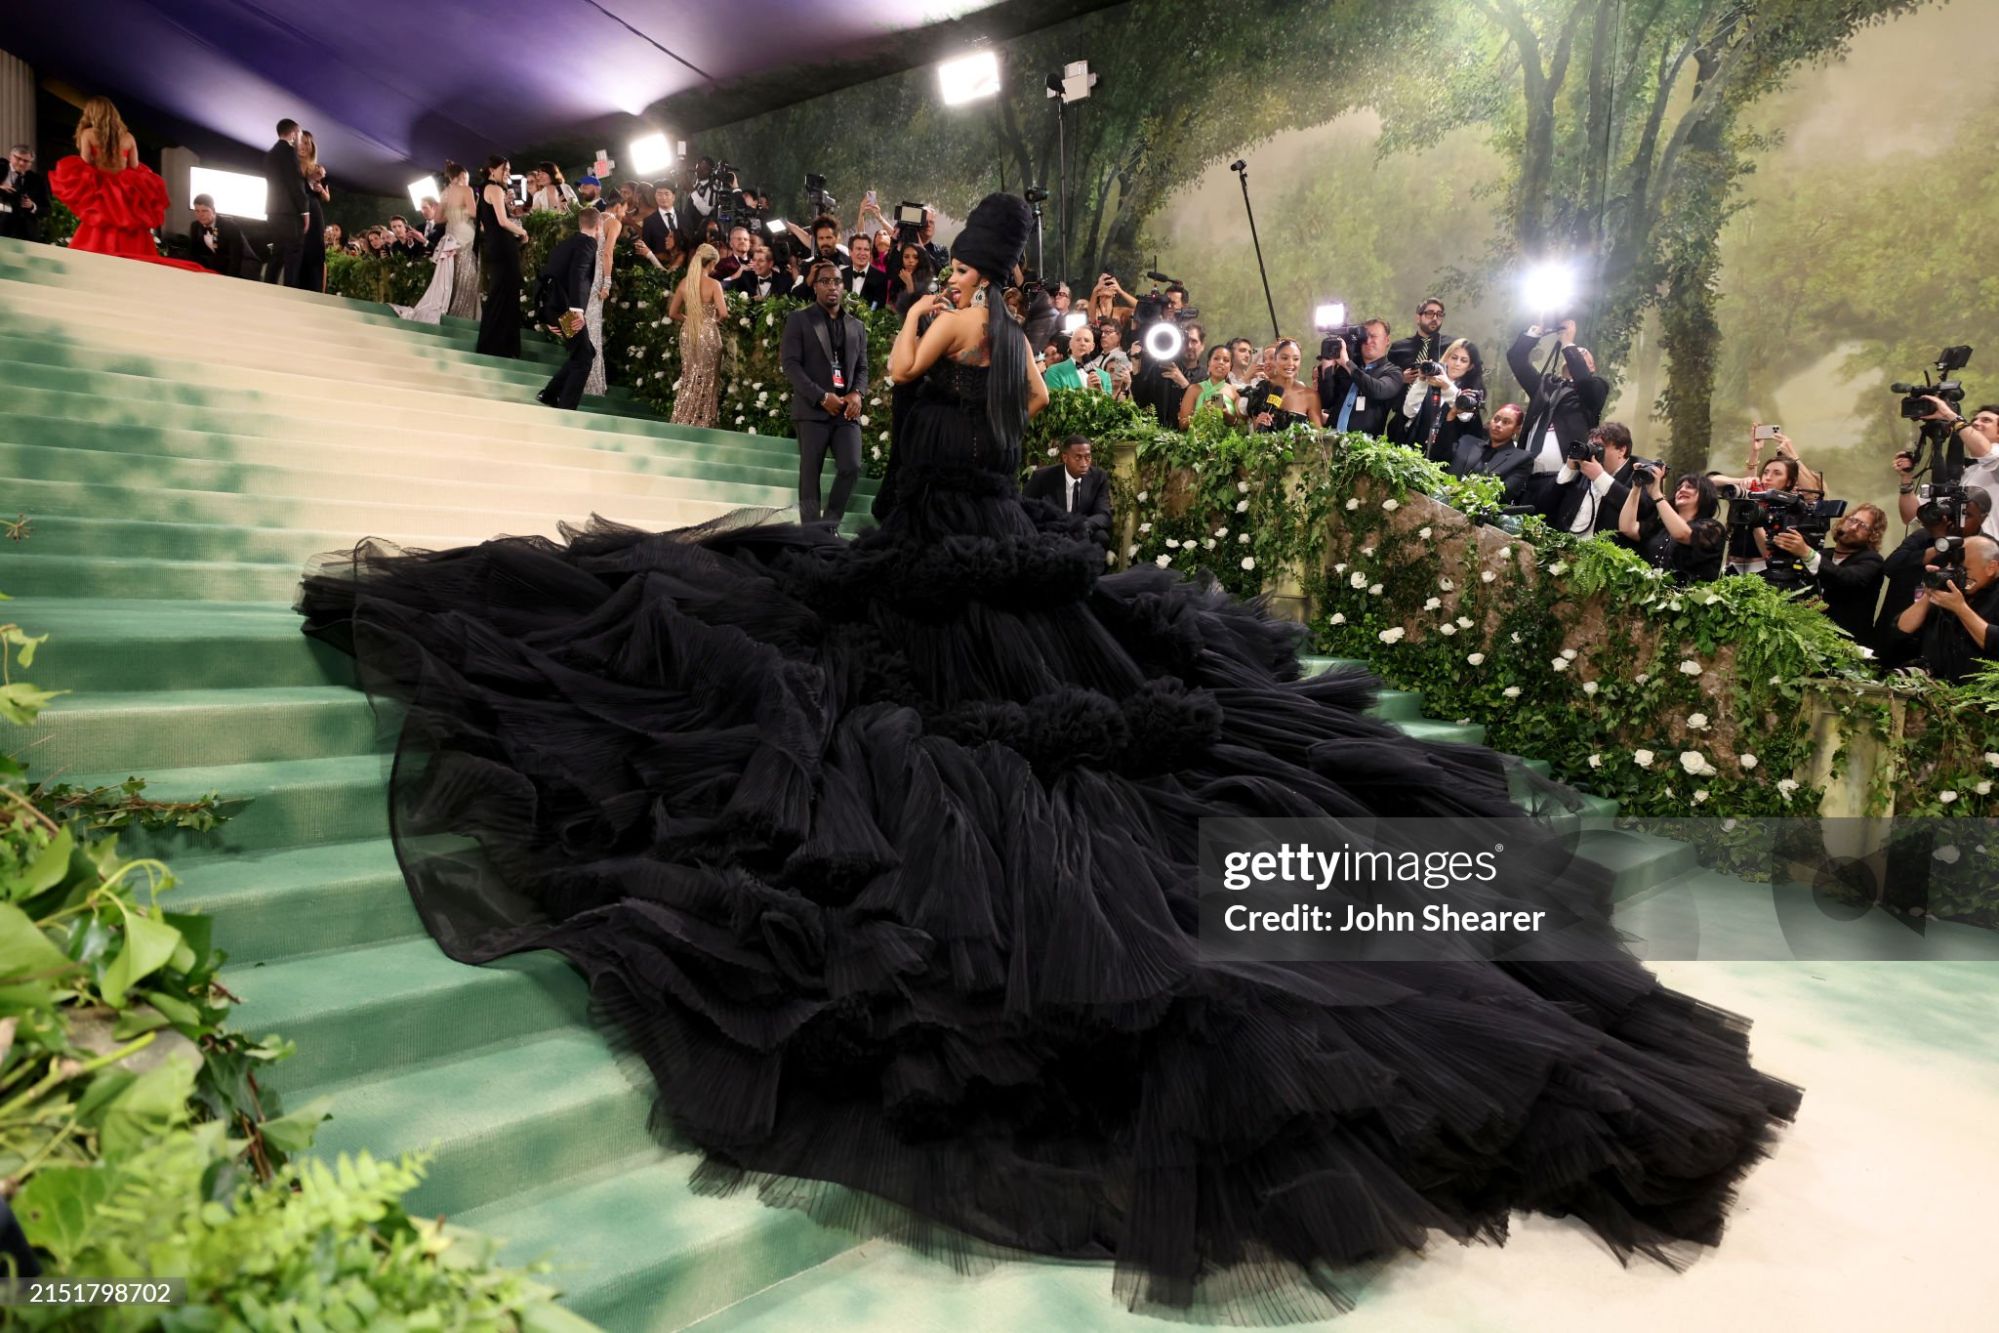 gettyimages-2151798702-2048x2048.jpg